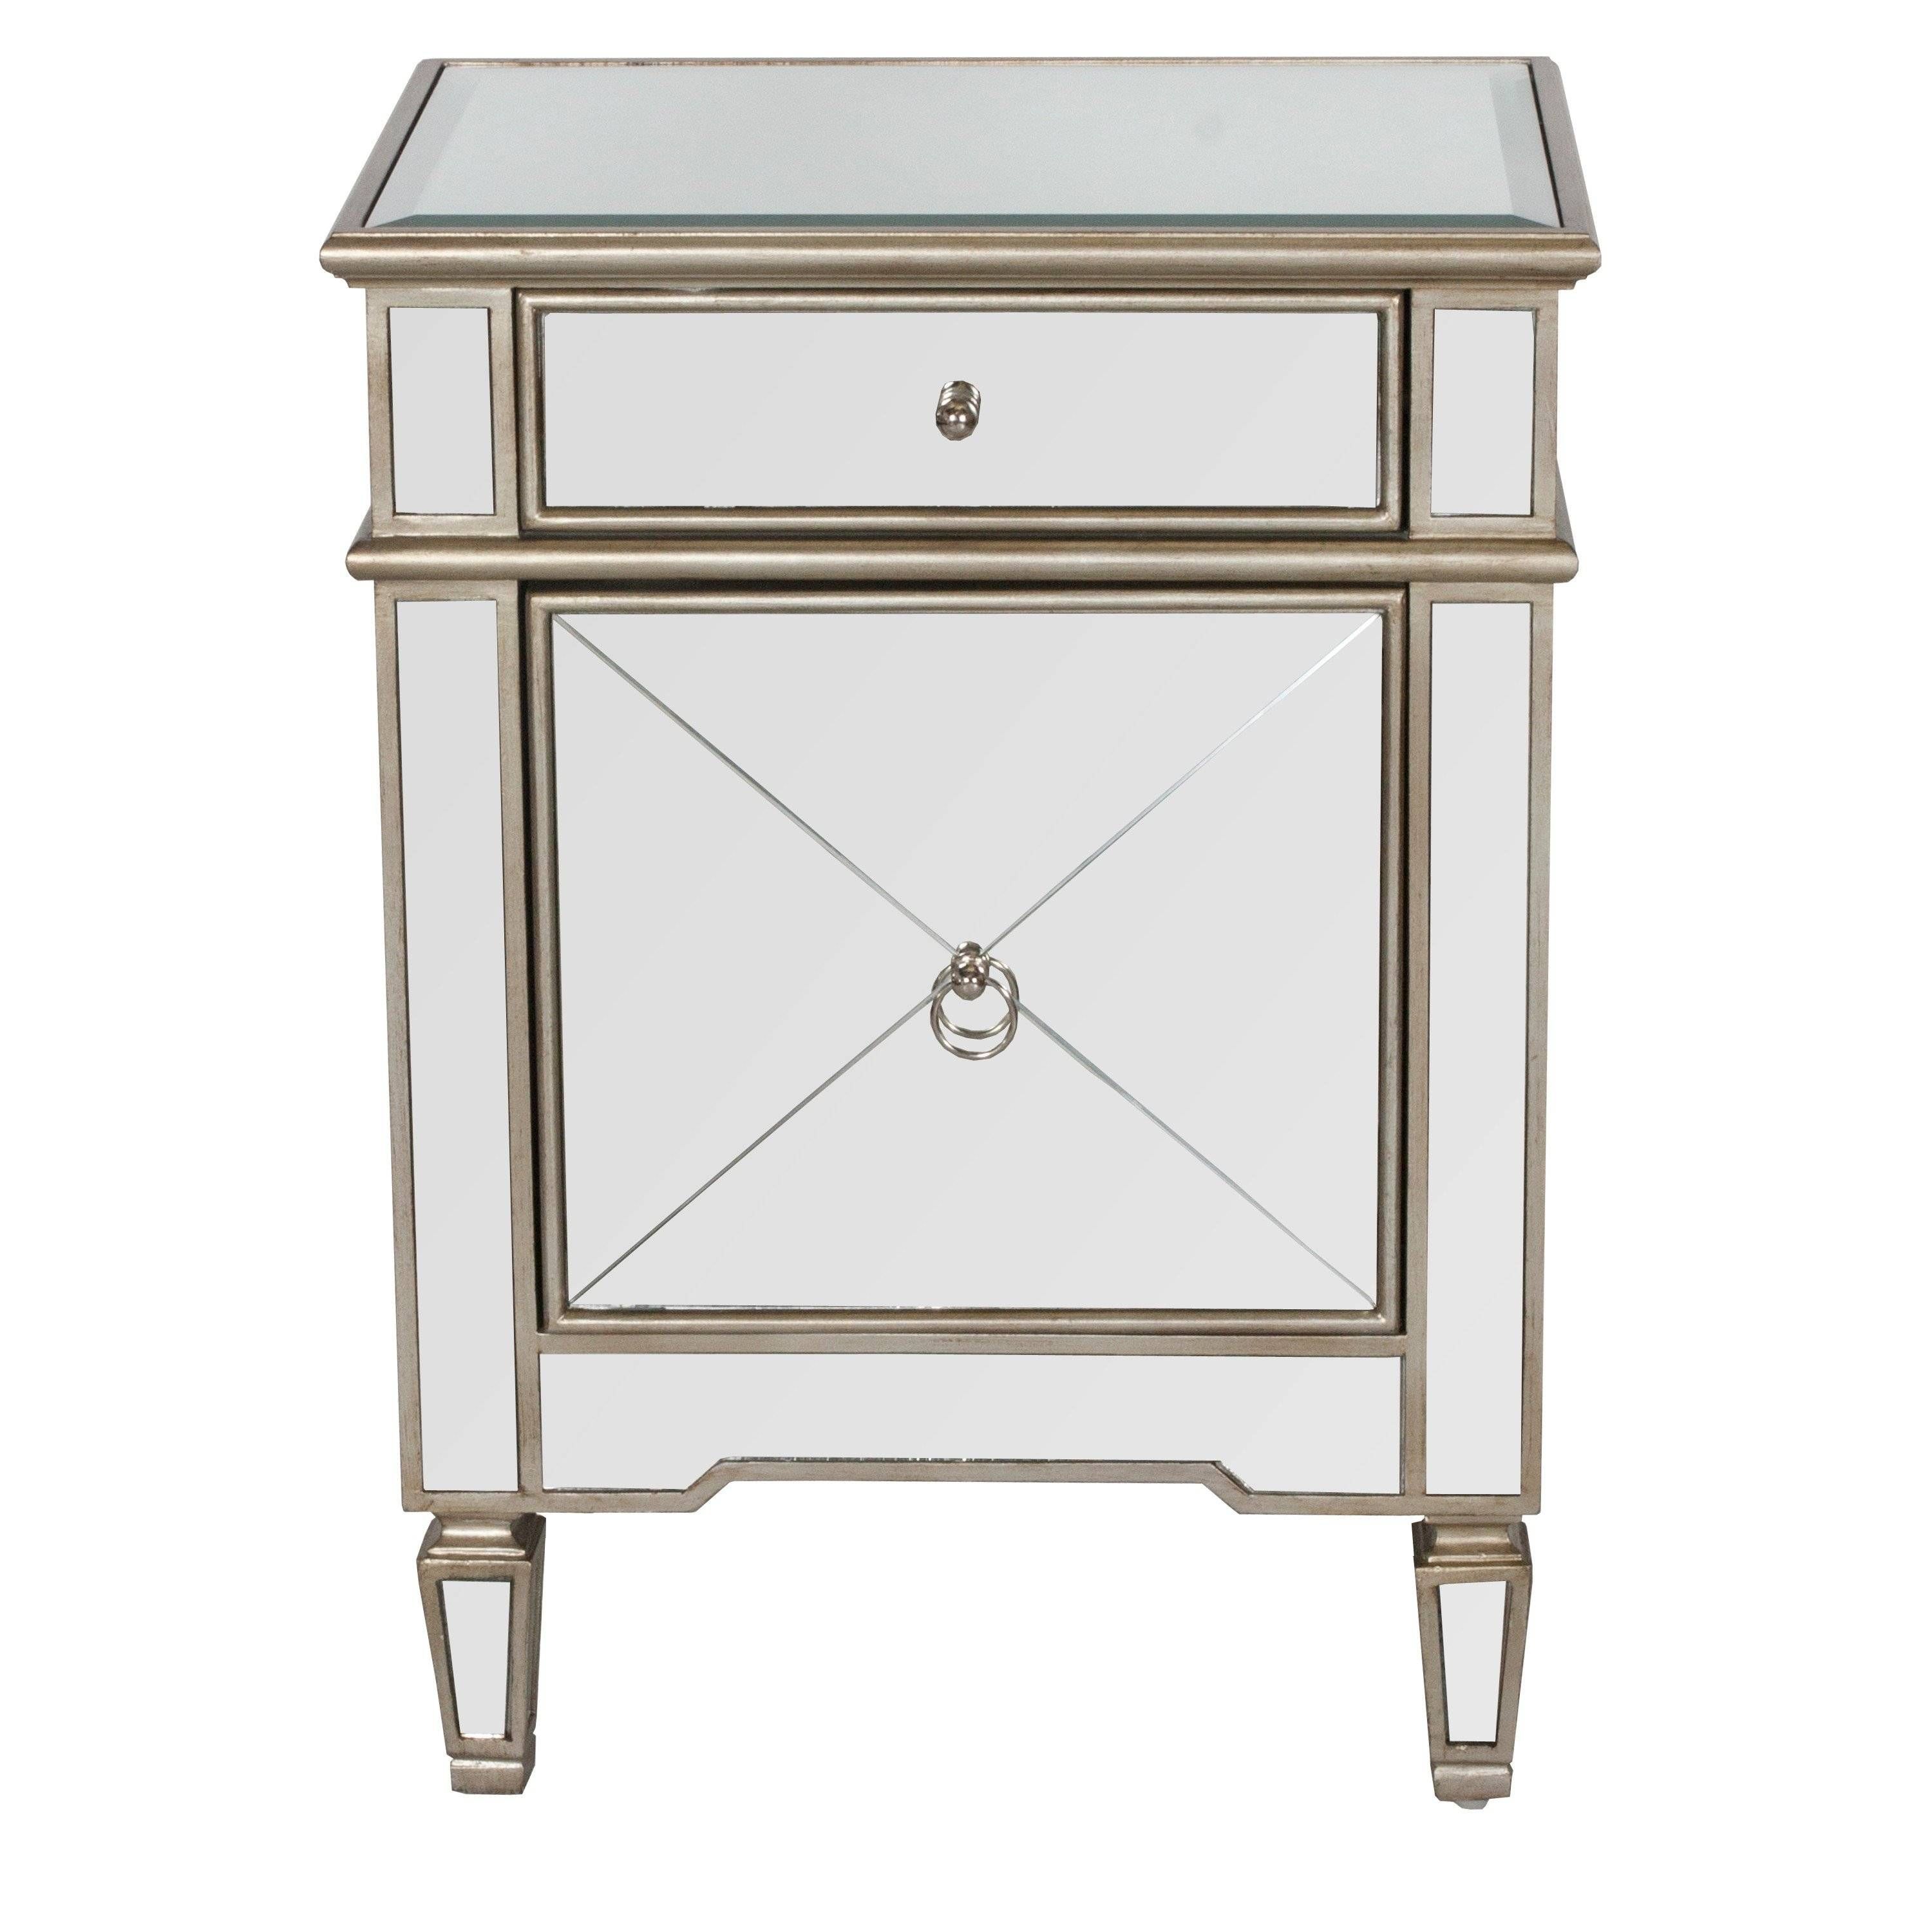 Claudette Silver Bedside Table | Regency Distribution With Regard To Bedside Tables Antique Mirrors (View 10 of 15)